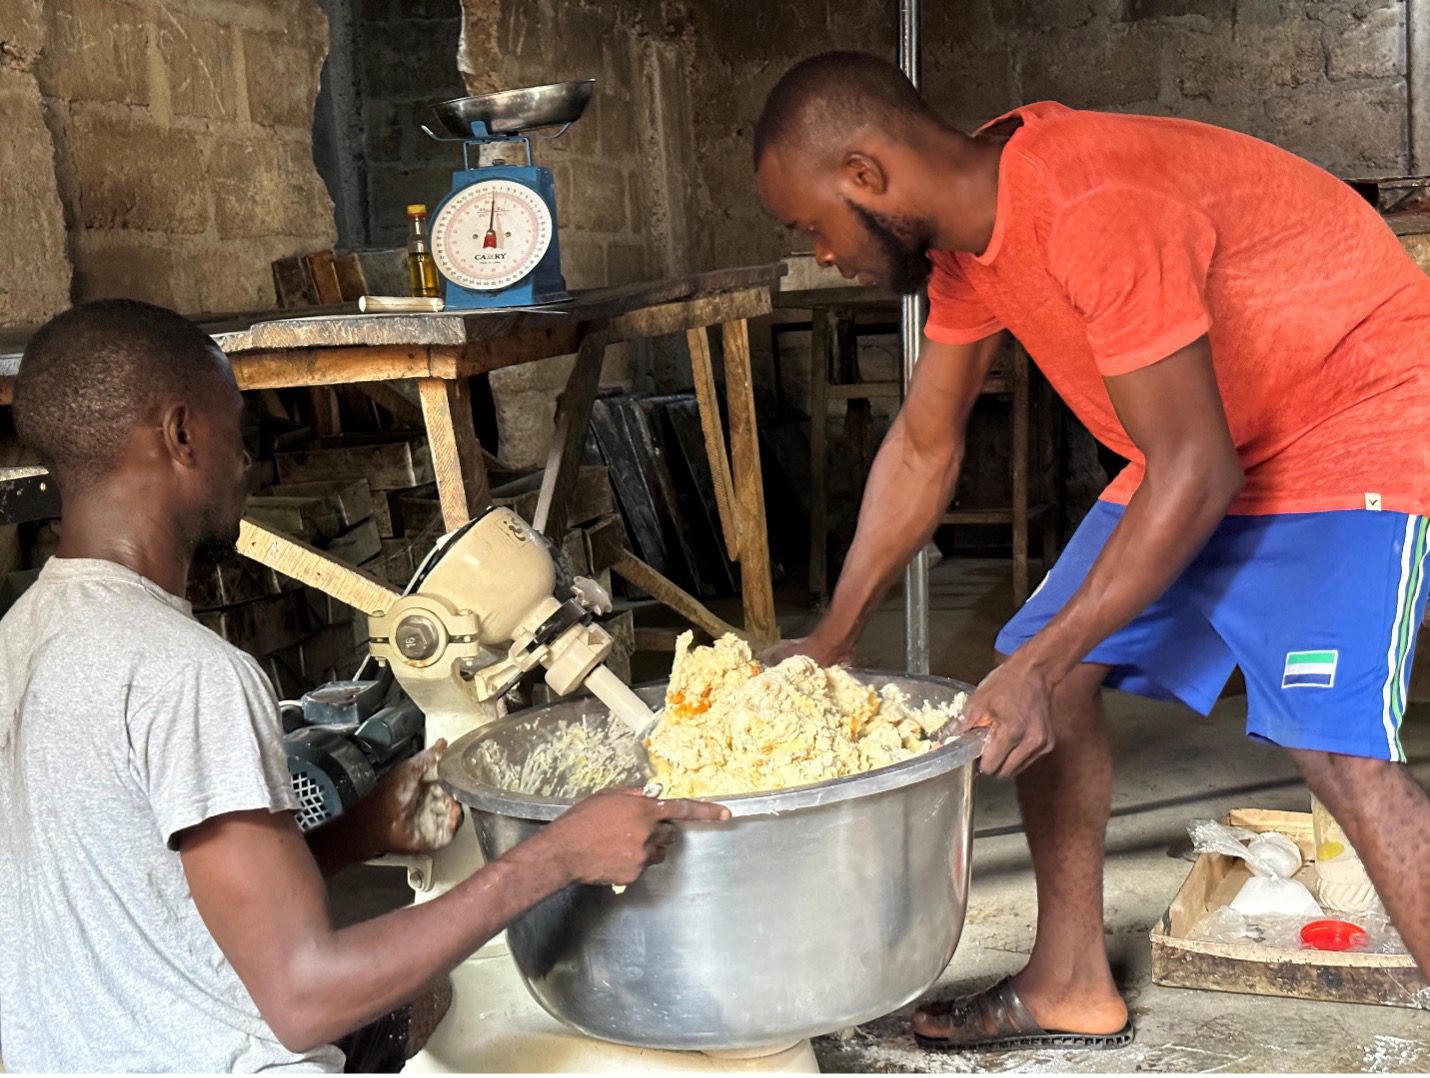 Two men with dark skin wearing t-shirts hold onto a large mixing bowl. Sweet potato bread dough is being mixed in the bowl with a large stand mixer. Behind them are work benches.